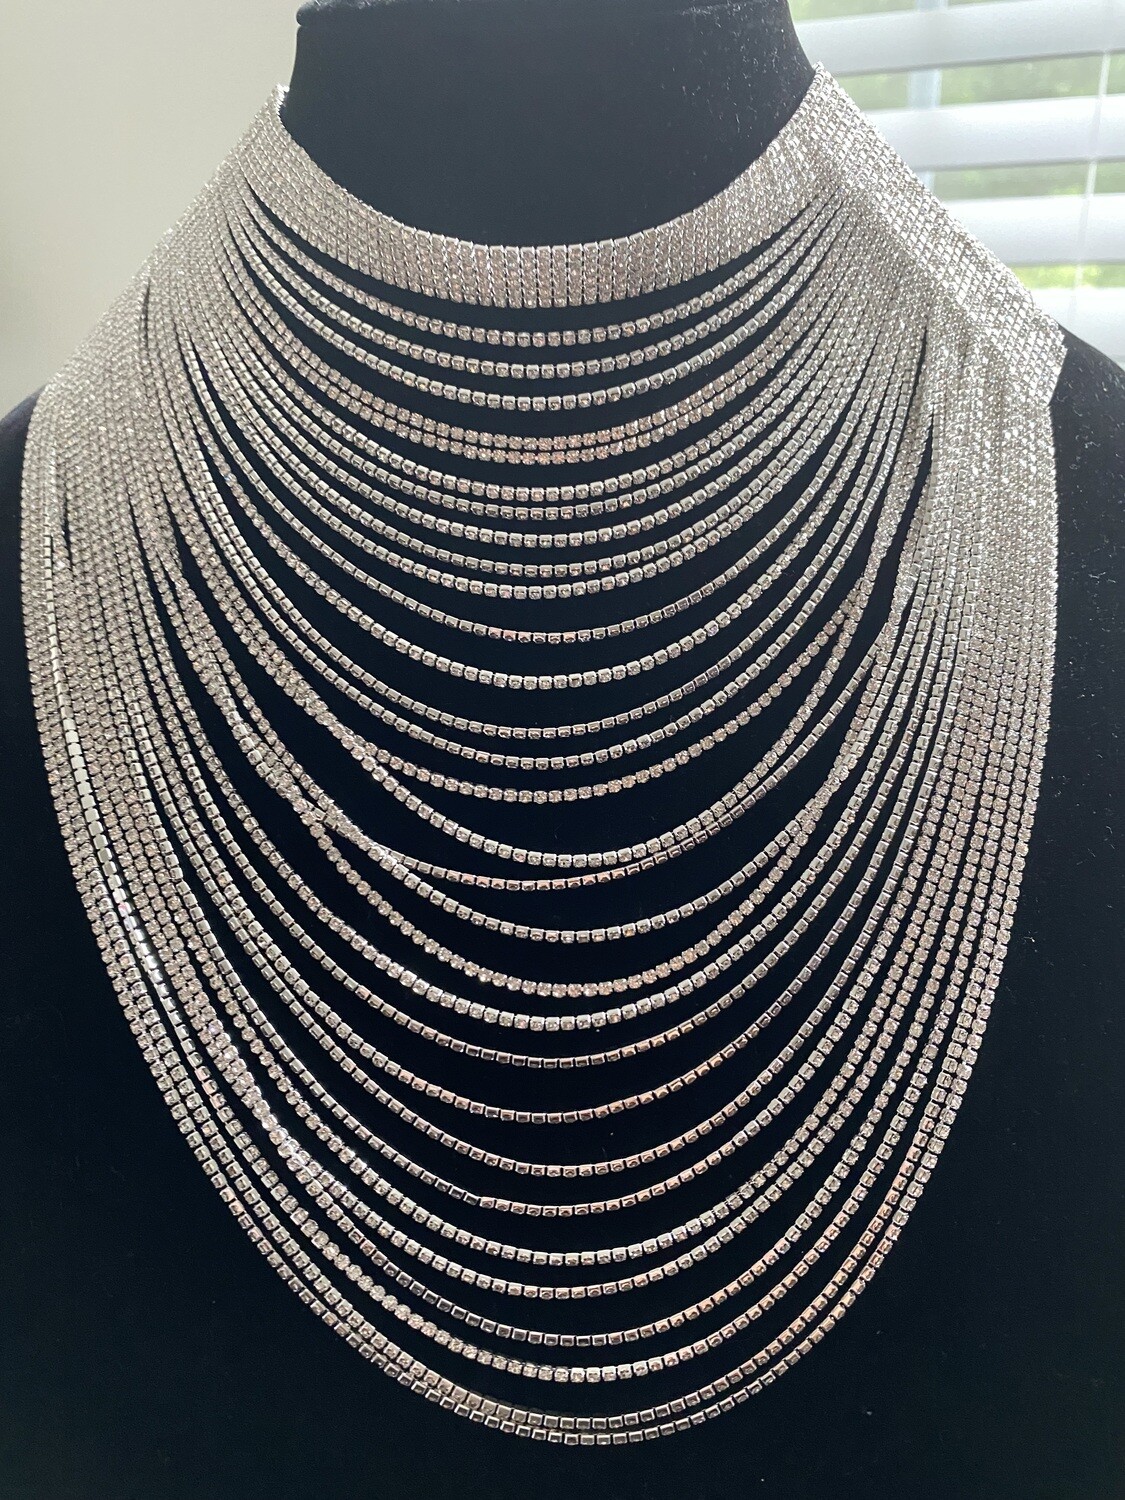 Silver Multi Strand Necklace| Bling Jewelry | Wedding Jewelry | Luxury Gifts| Evening Jewerly